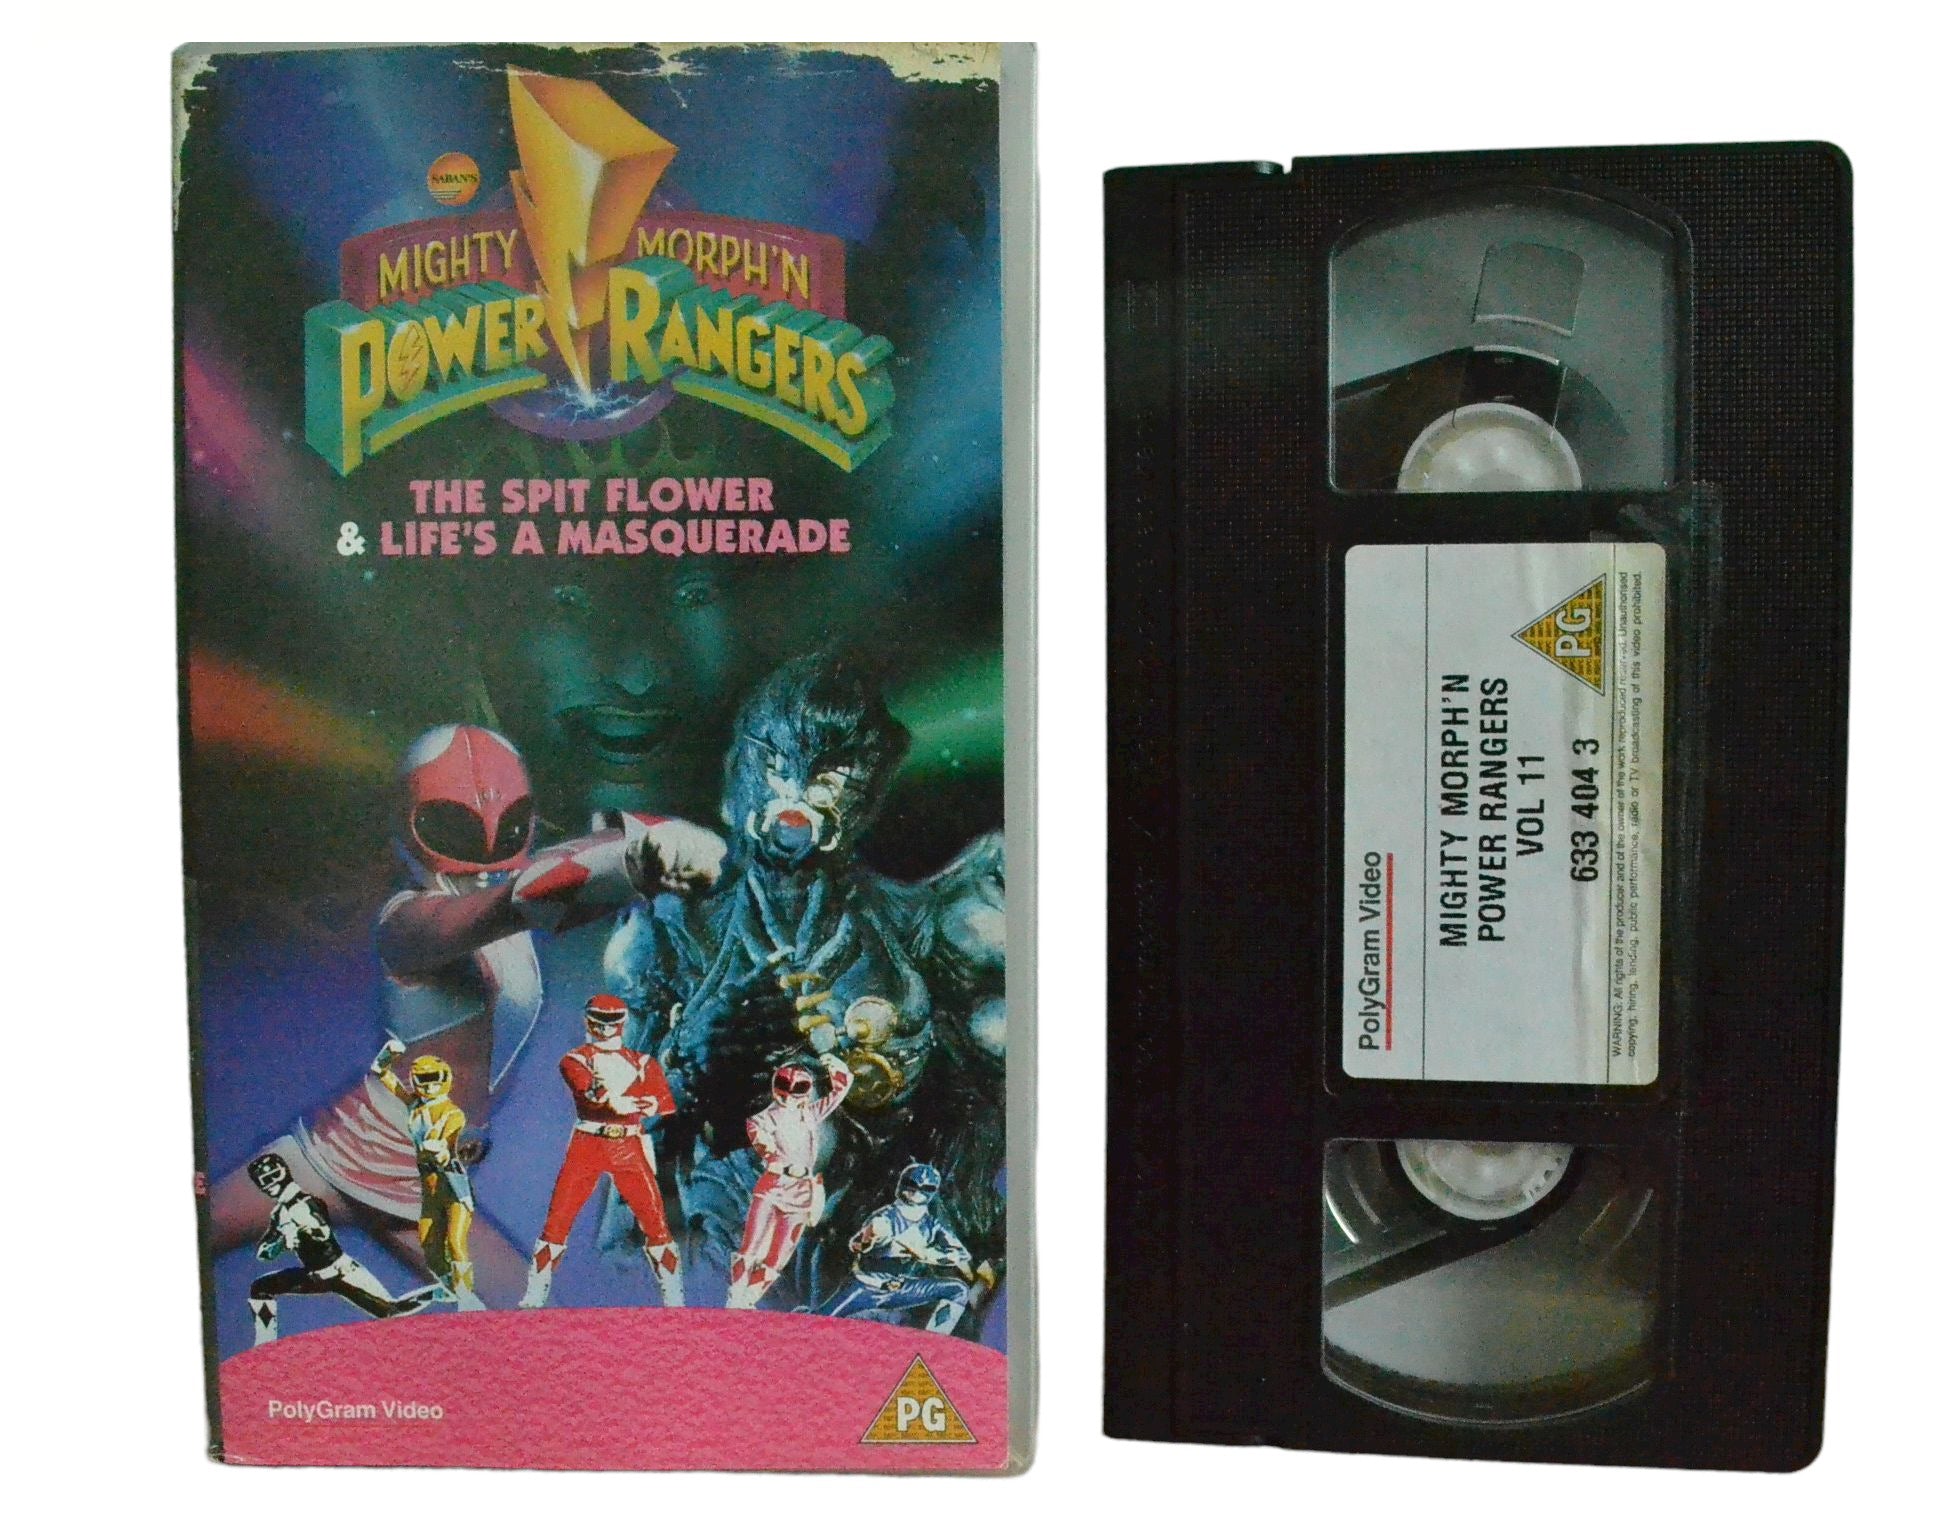 Mighty Morph 'N Power Rangers - The Spit Flower & Life's A Masquerade - Polygram Video - Childrens - Pal VHS-